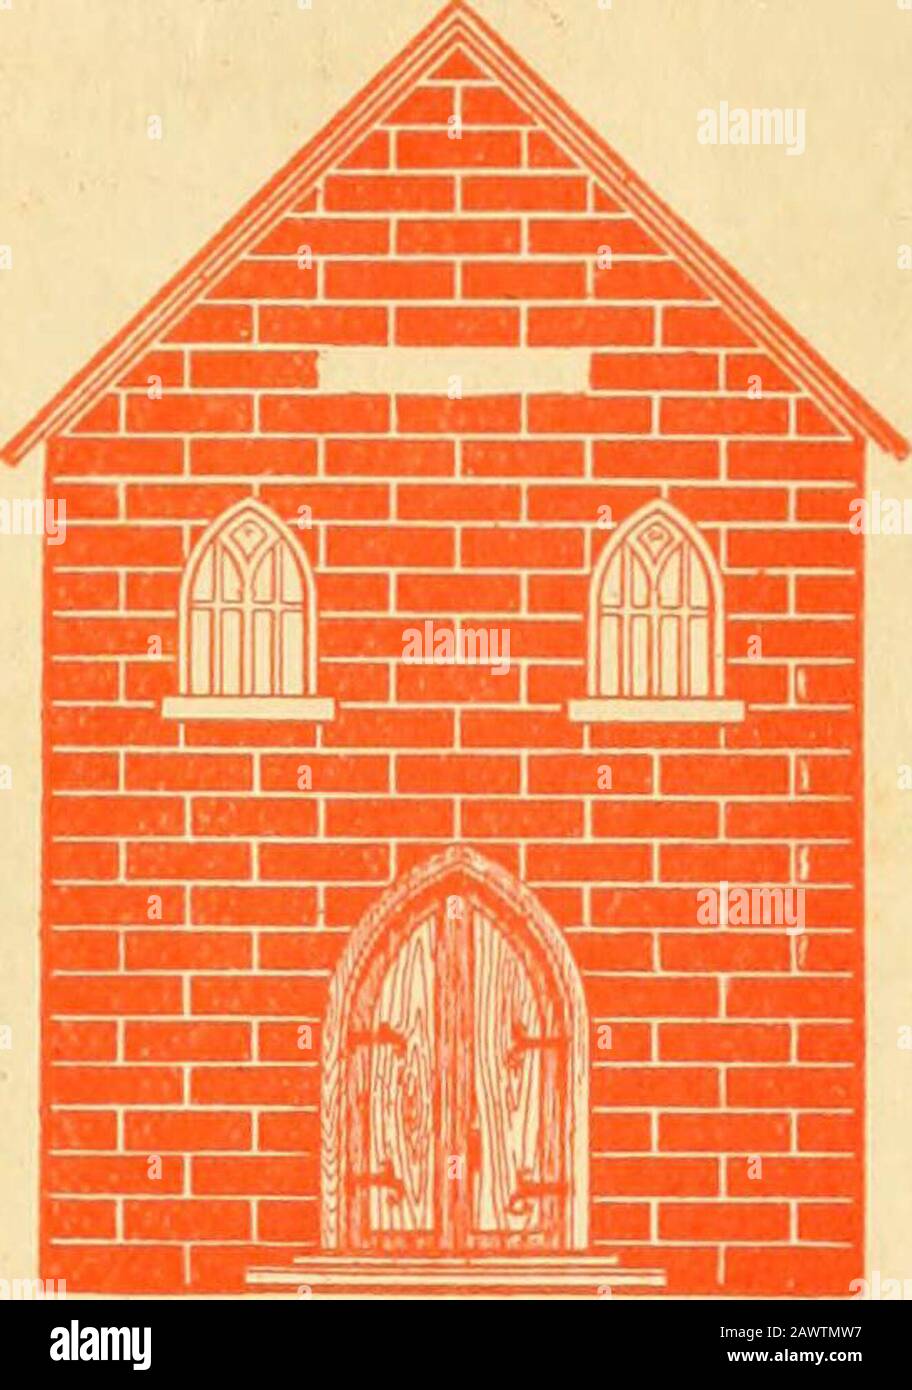 Catalogue of Sunday School supplies for Christmas 1897. . Improved Brick Buyer.. Made Envelopestyle, but has peak-ed roof and looksexactly like front ofa Church. Puncturewith a pin or markeach Brick sold withan X or other desig-nating mark. Sell the Bricks atsay, 5 or 10 centseach; the door for50 cents, and thewindows at 2.5 centseach, and drop themoney In the slot. A novel waycollect money. to Price $1.50 IMPROVED X, ^ ^ „„„* BRICK BUYER &^^*^ ^^ THESE CUTS ARE HALF THE ACTUAL SIZE. WHAT THE PEOPLE SAY. We print here a few remarks by the people; just how many commendatory letters we have rece Stock Photo